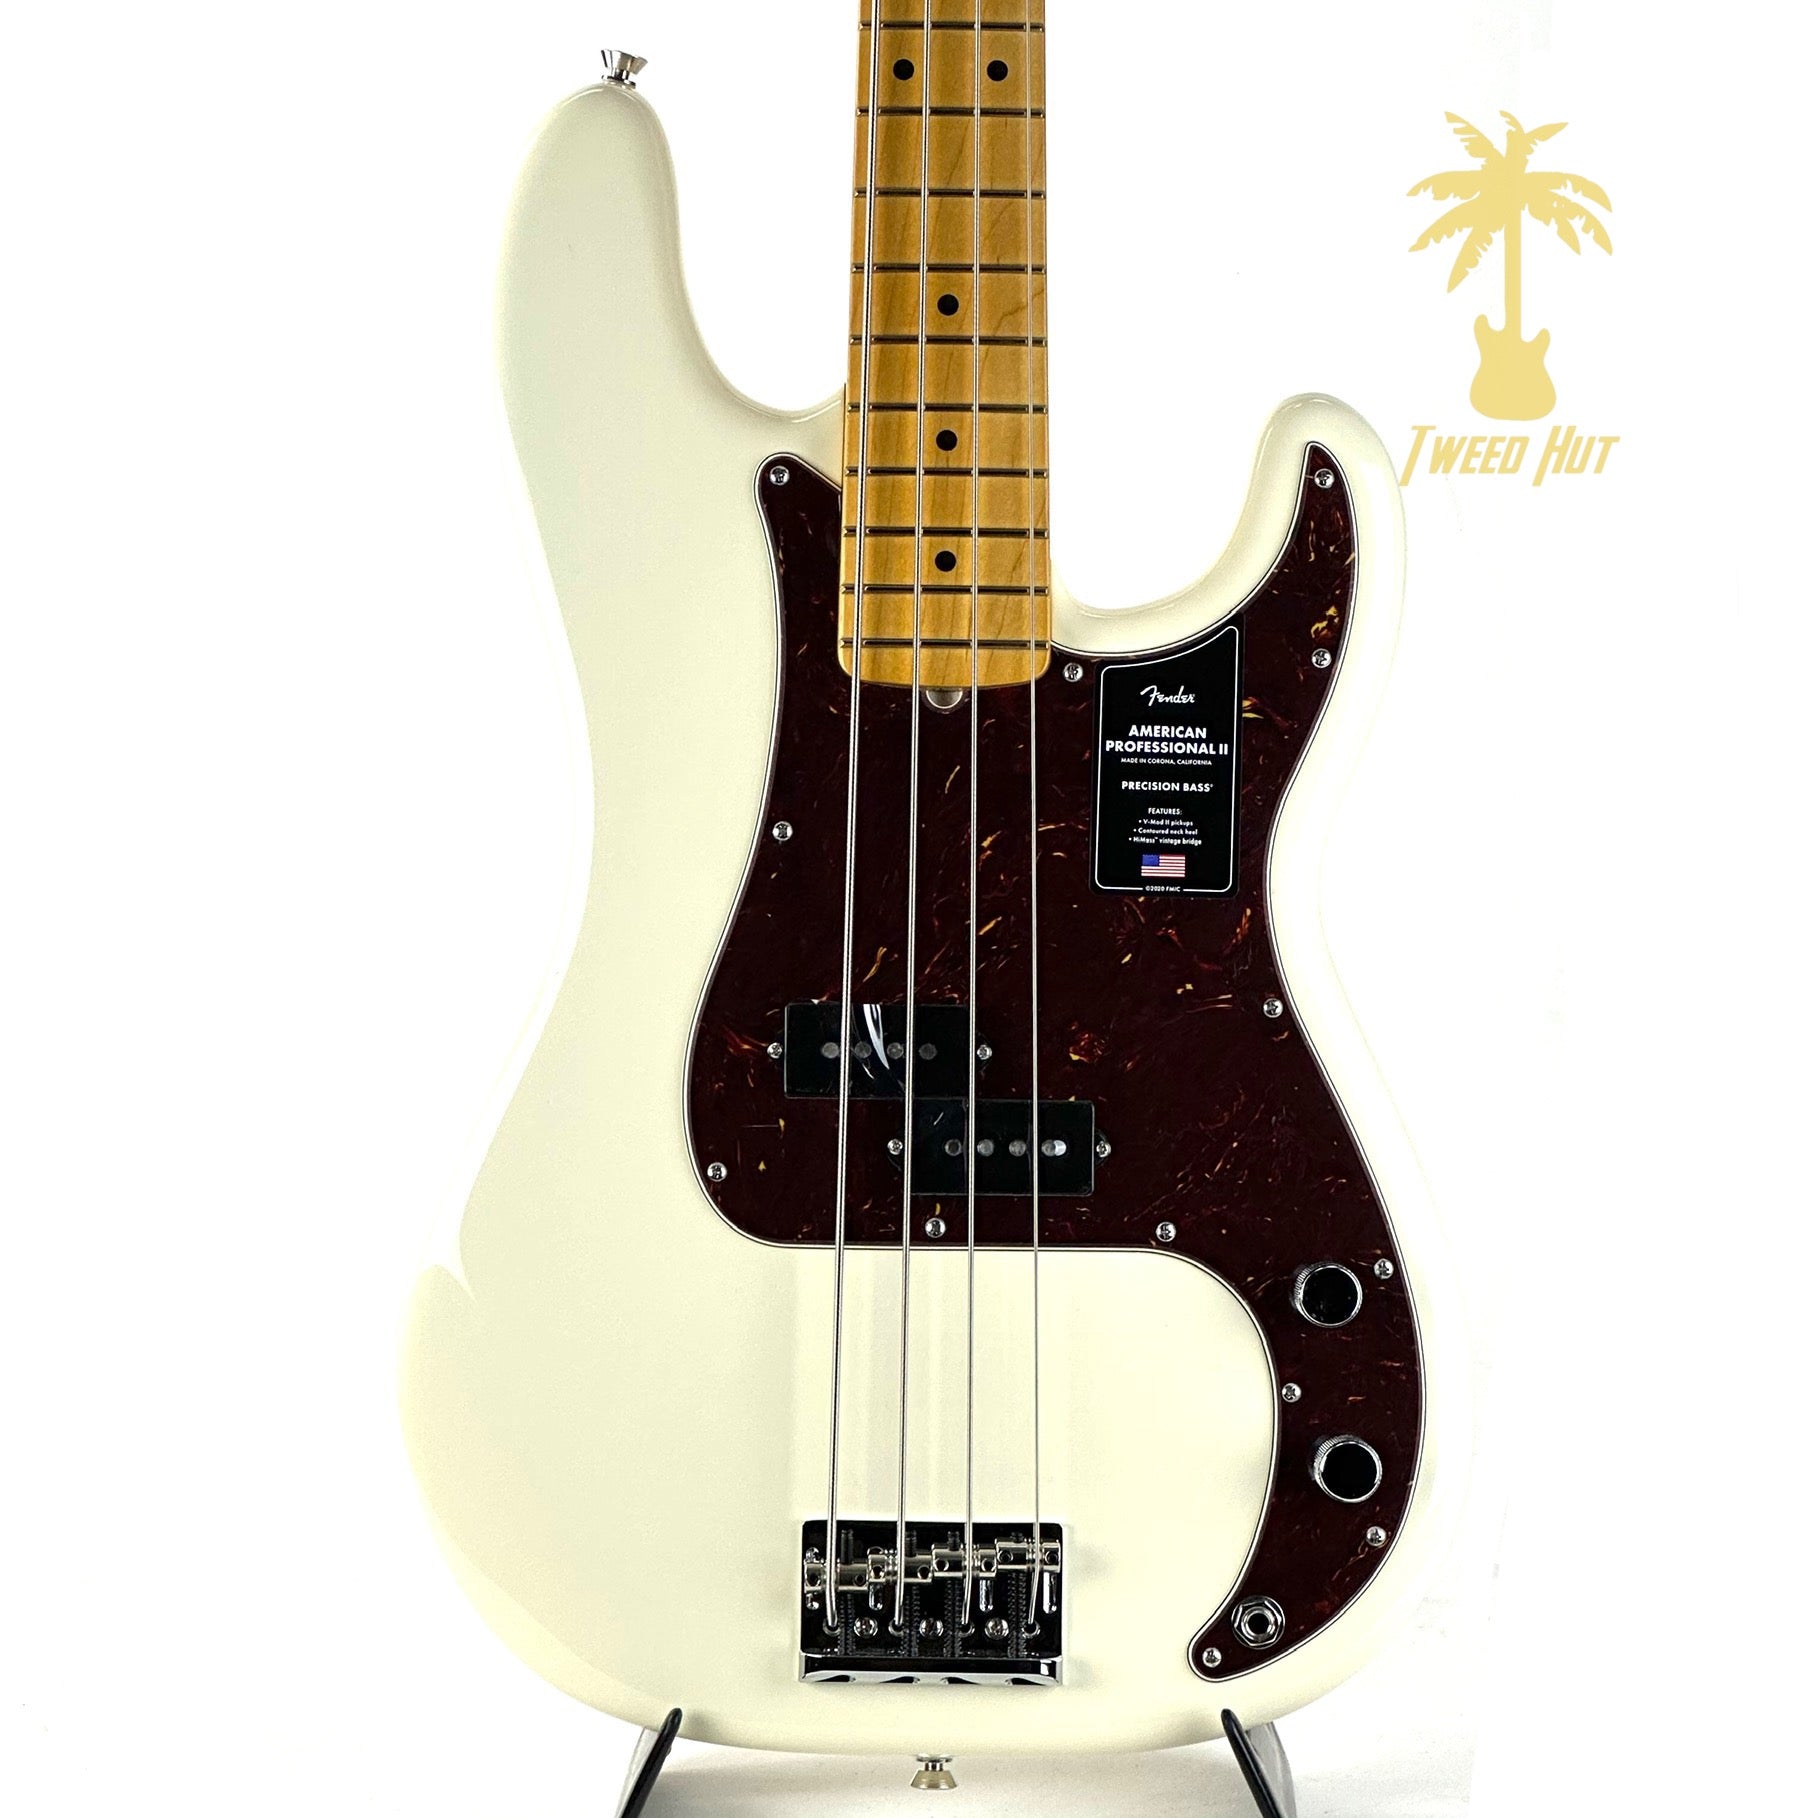 OLYMPIC　II　PROFESSIONAL　AMERICAN　BASS　WHITE　FENDER　PRECISION